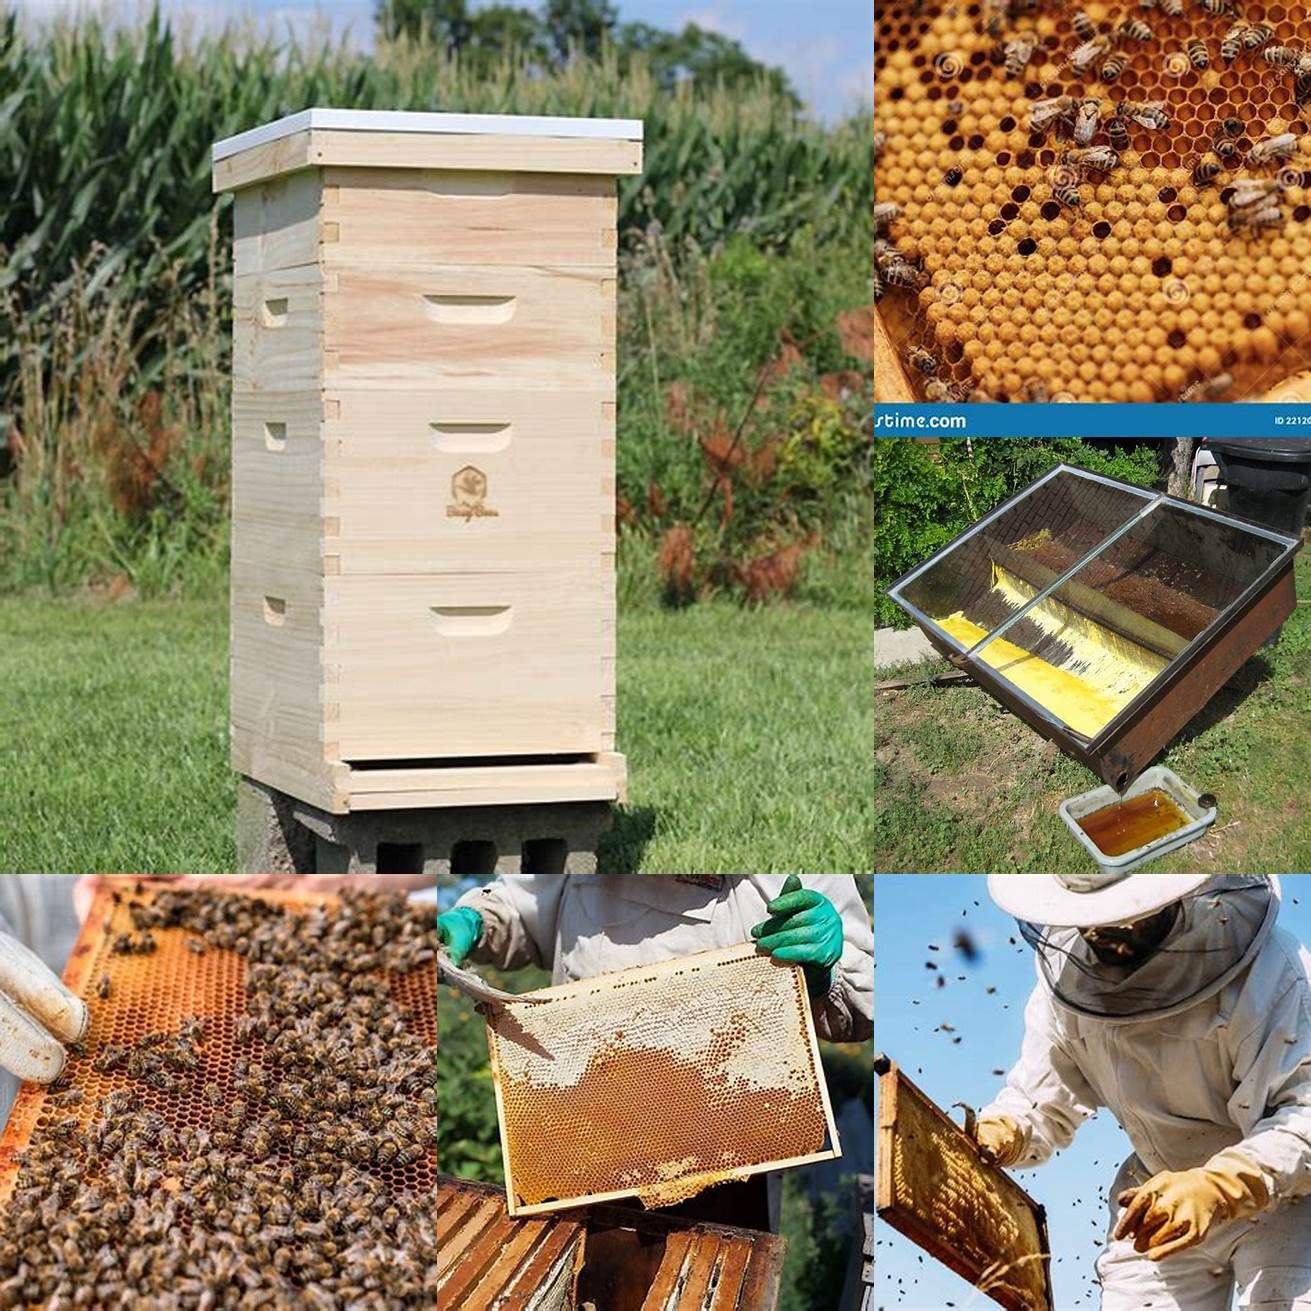 Beeswax and Honey Production